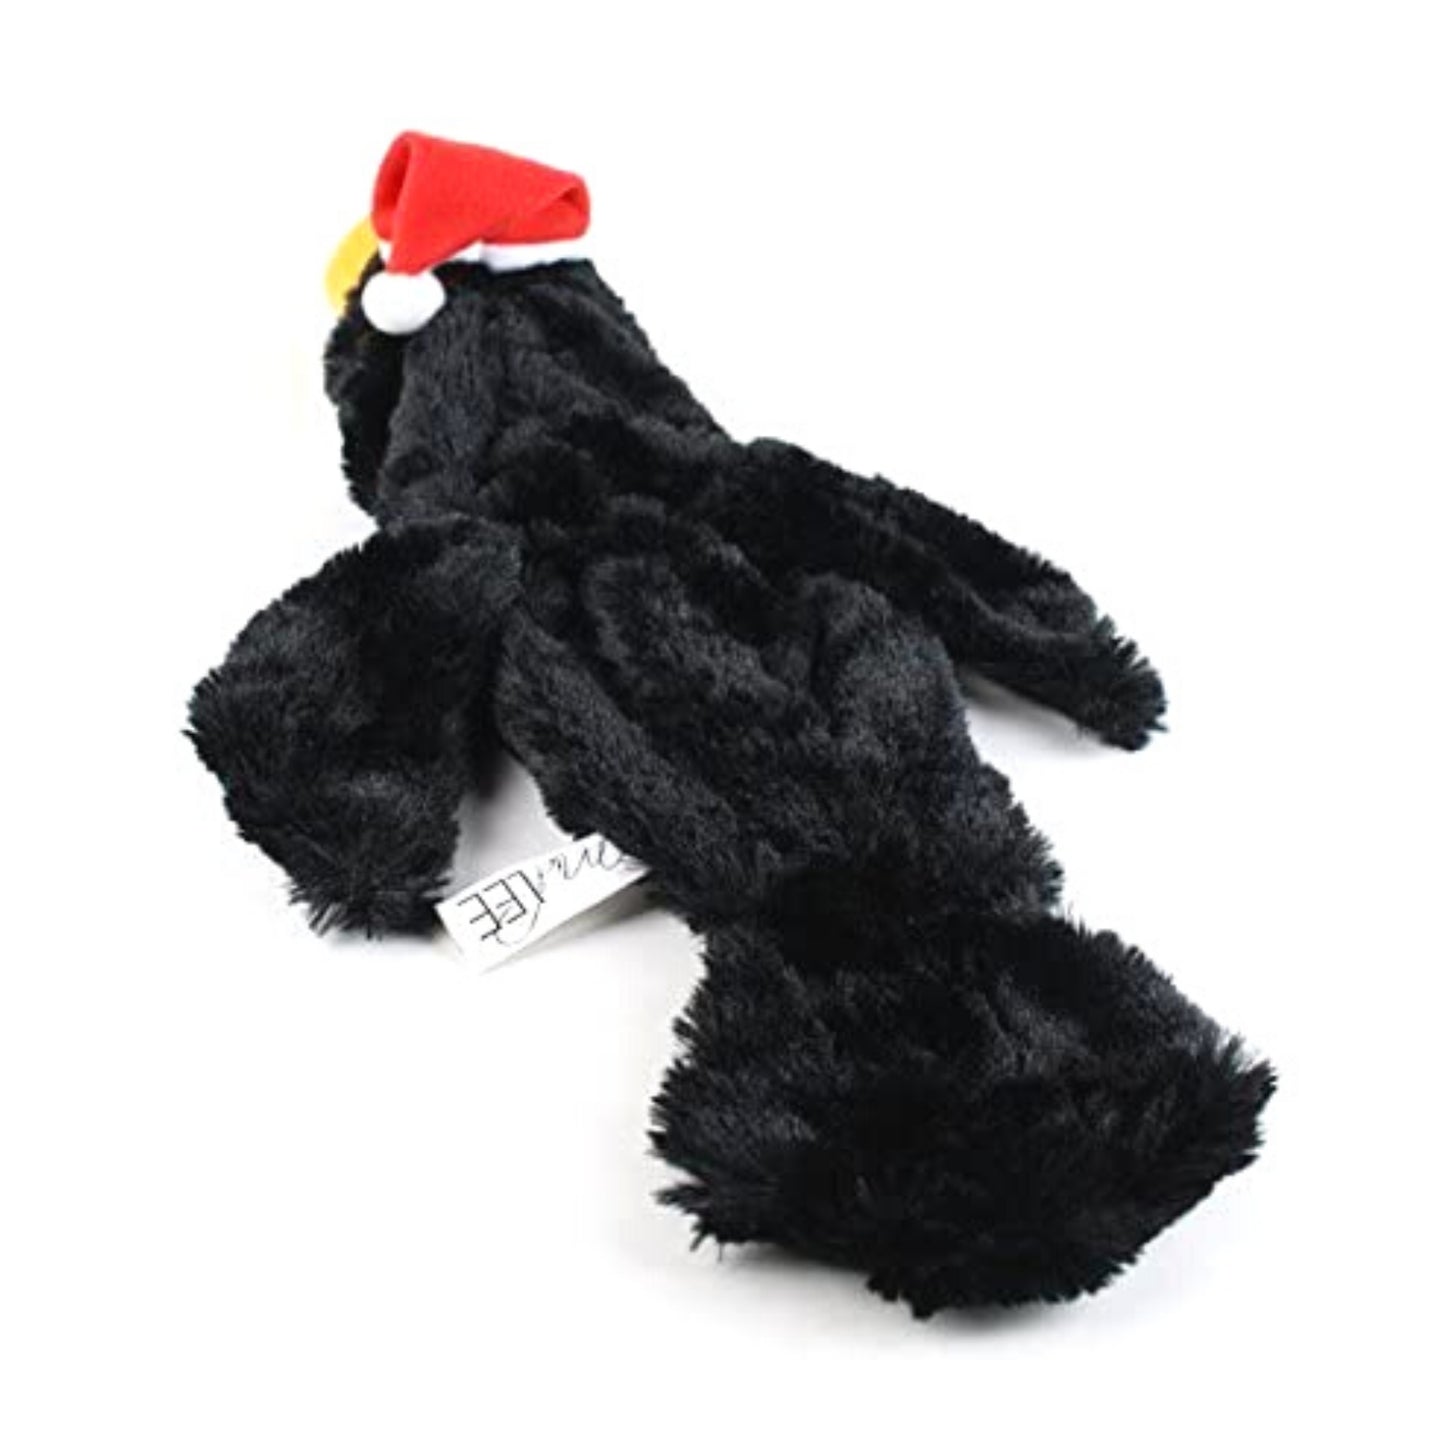 Midlee Toucan Stuffingless Dog Toy with Santa Hat - 22"